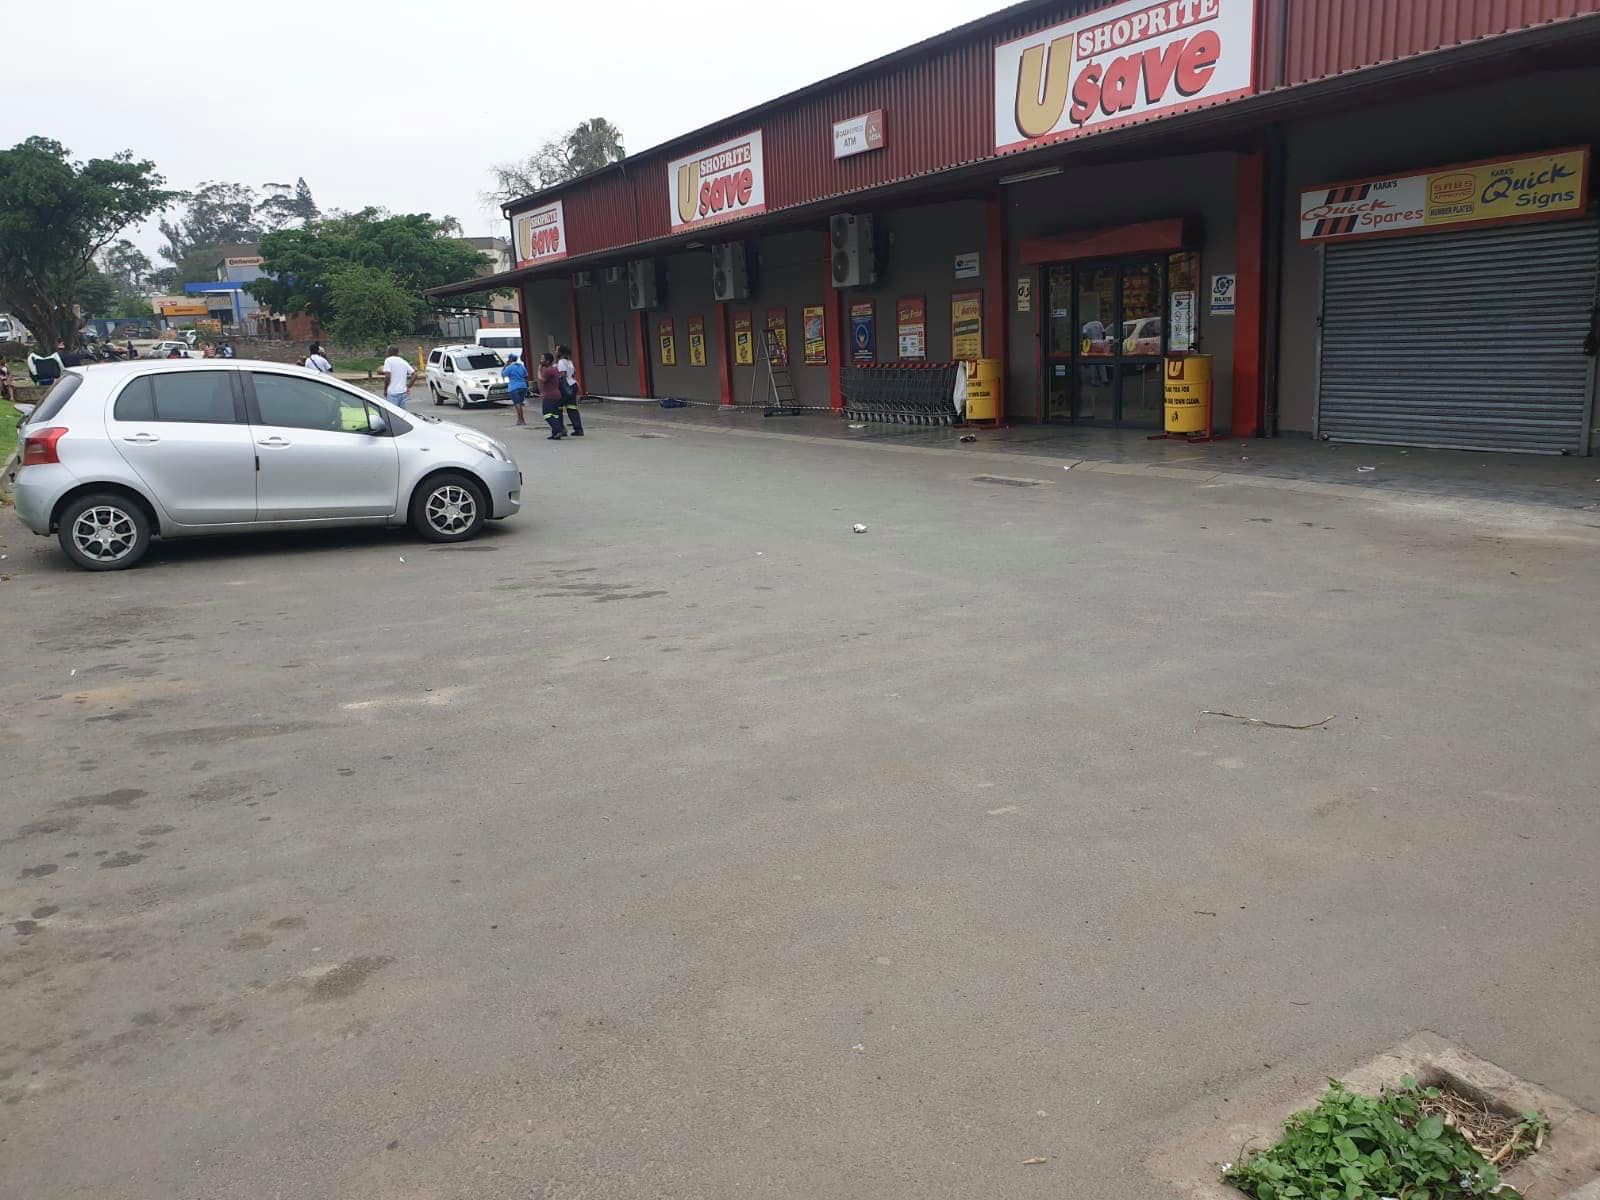 Armed robbery at a Shoprite USave in Tongaat